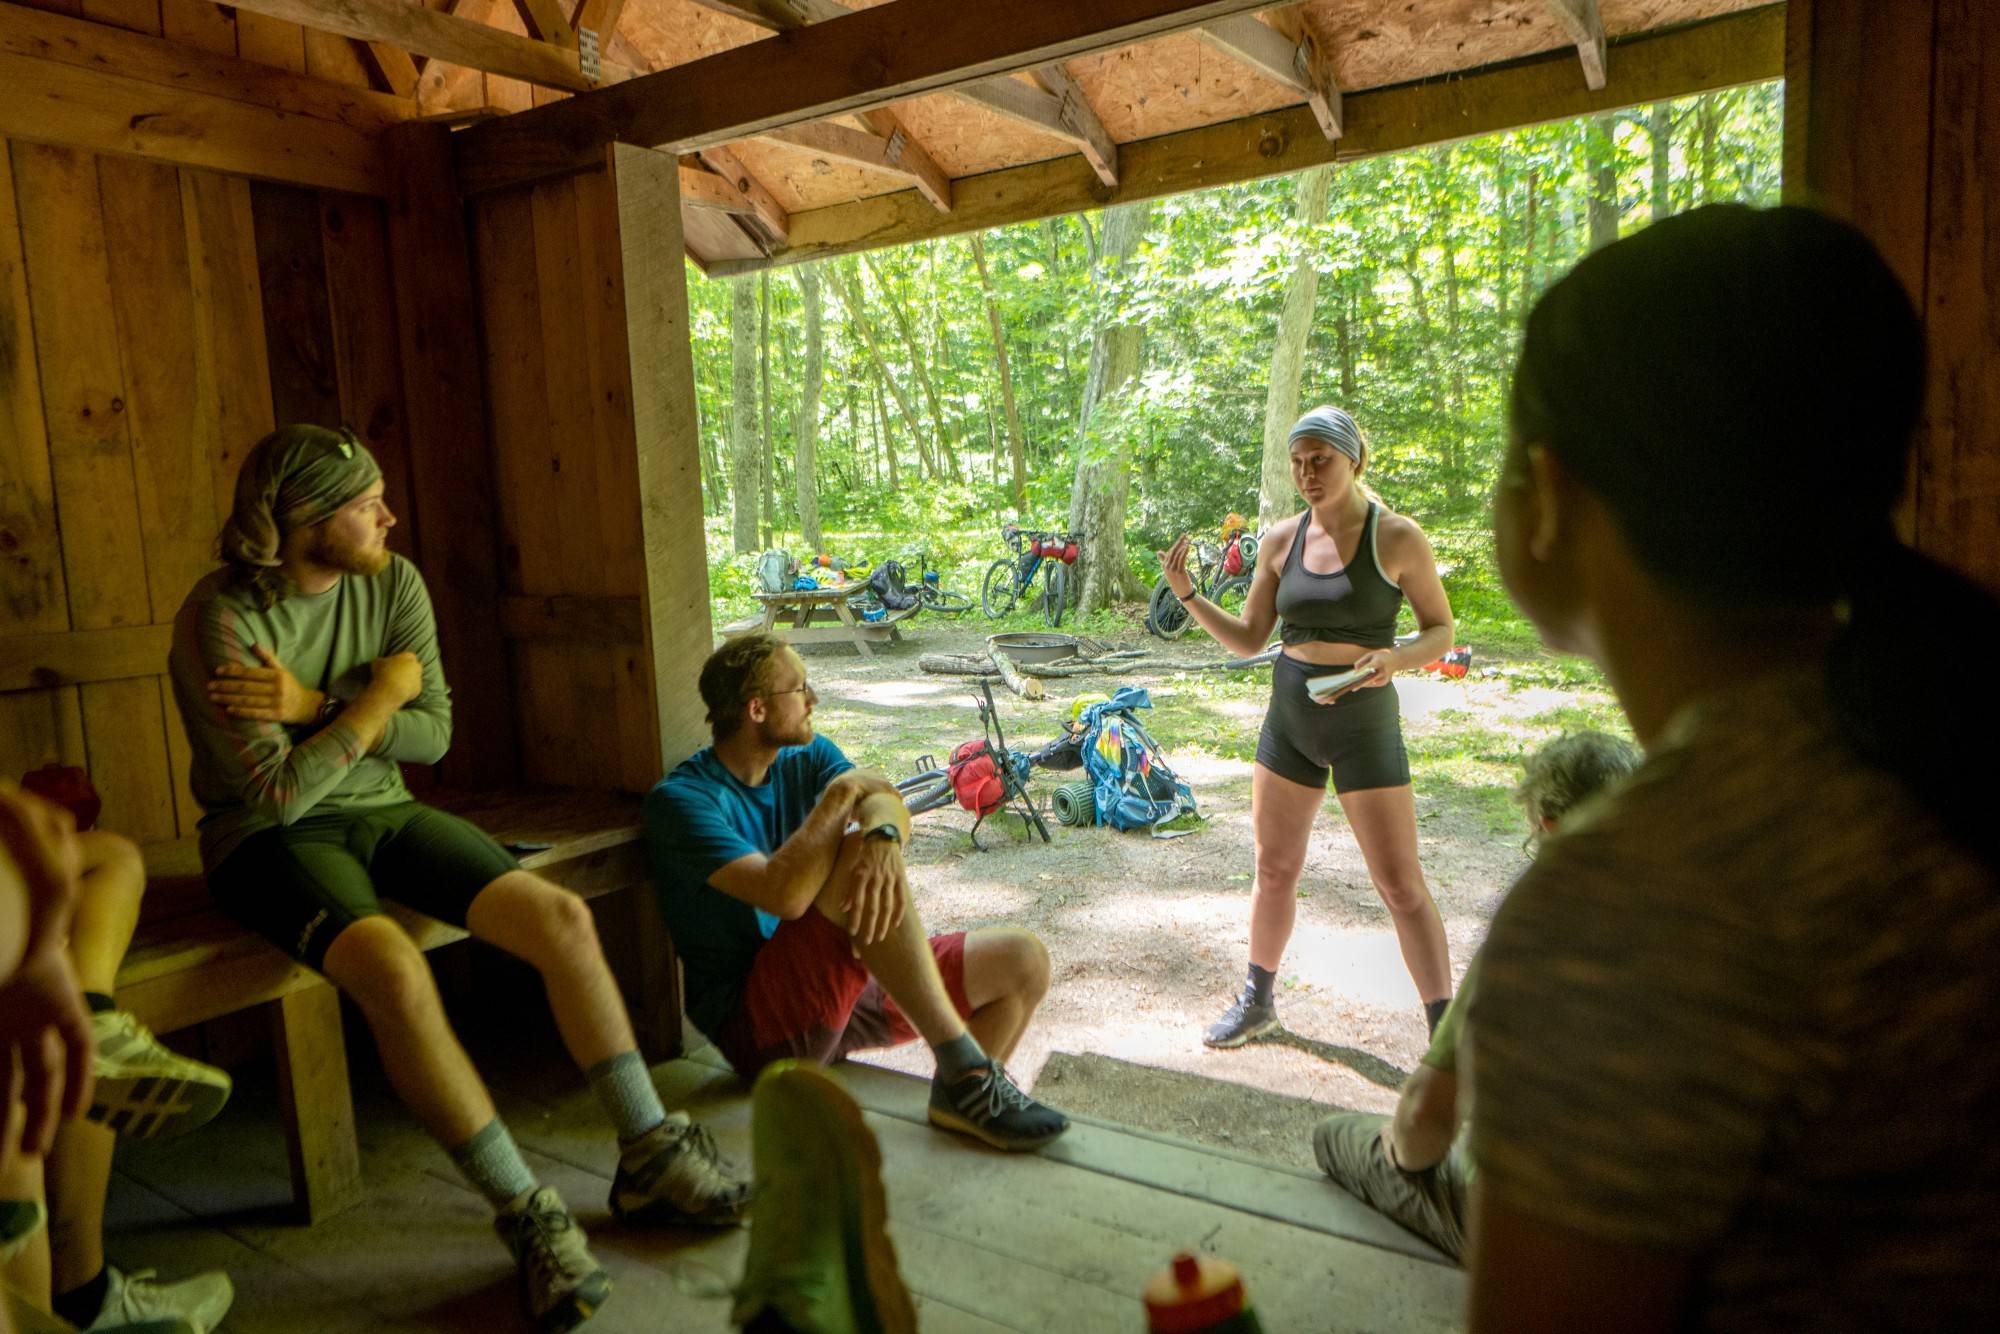 Reagan Berg teaches a lesson about the environmental stewardship following a lunch break on the Greenbrier Trail.